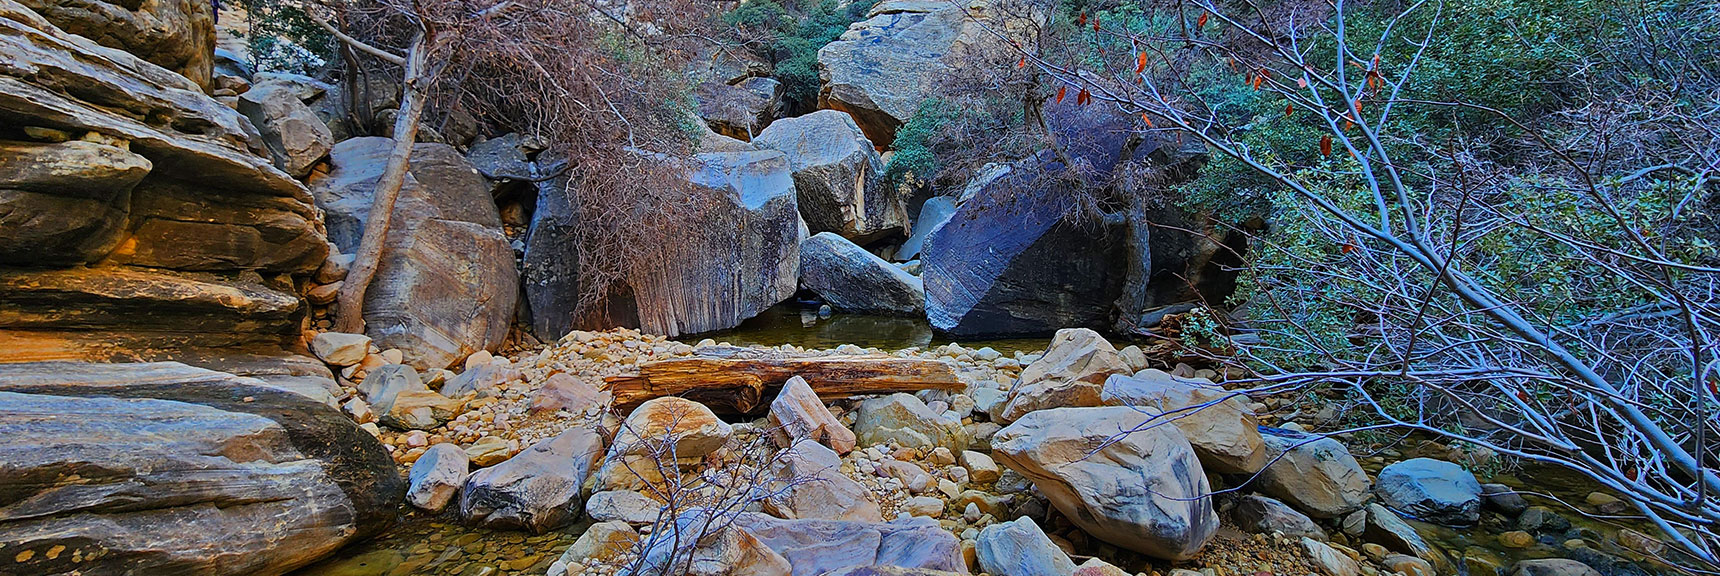 Around Every Corner a New View Opens, Unique to This Place Alone on Earth | Ice Box Canyon | Red Rock Canyon NCA, Nevada | Las Vegas Area Trails | David Smith